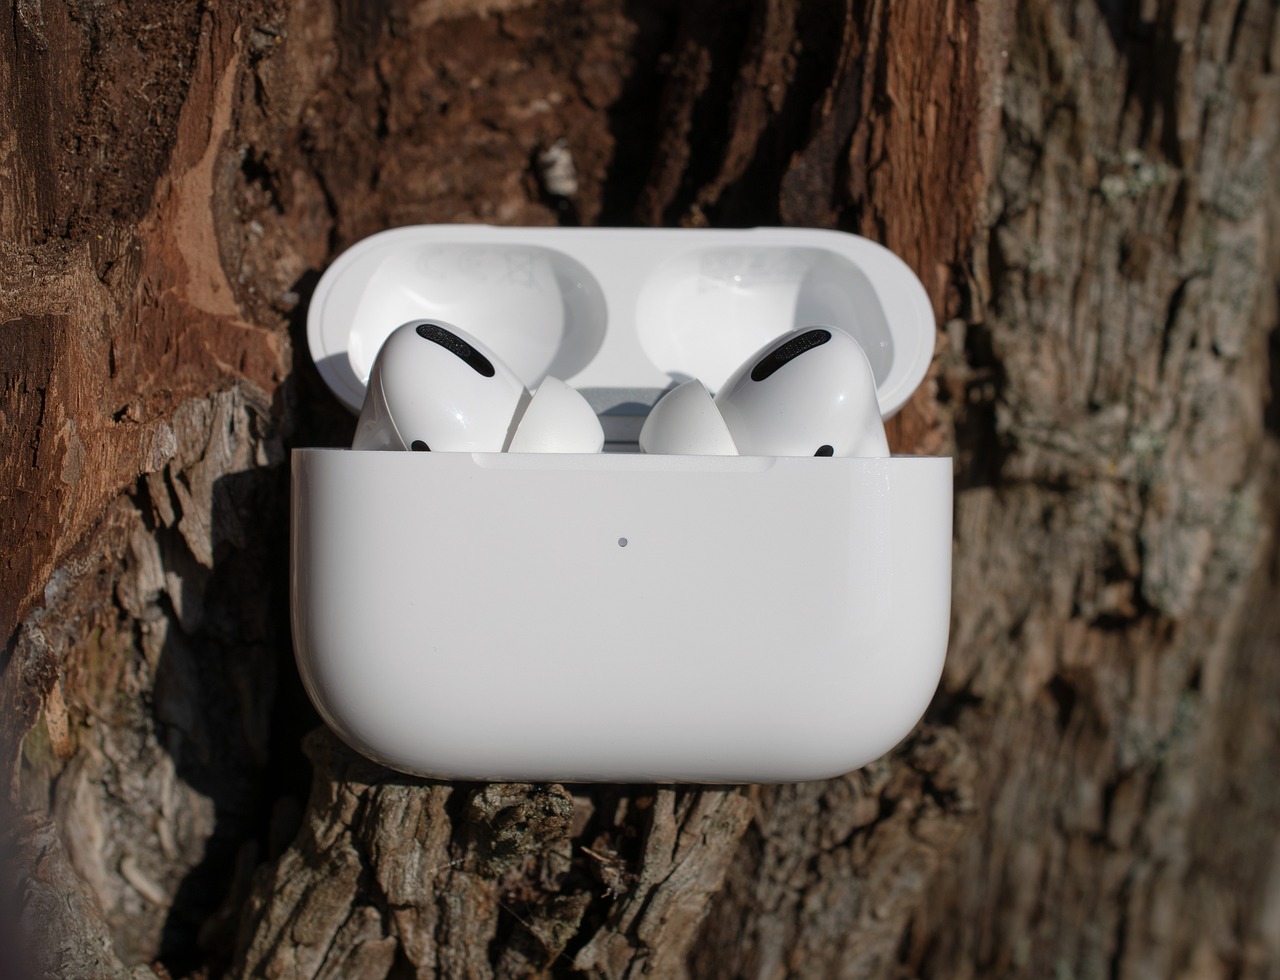 Do AirPods Work with Android? Exploring Compatibility and Functionality